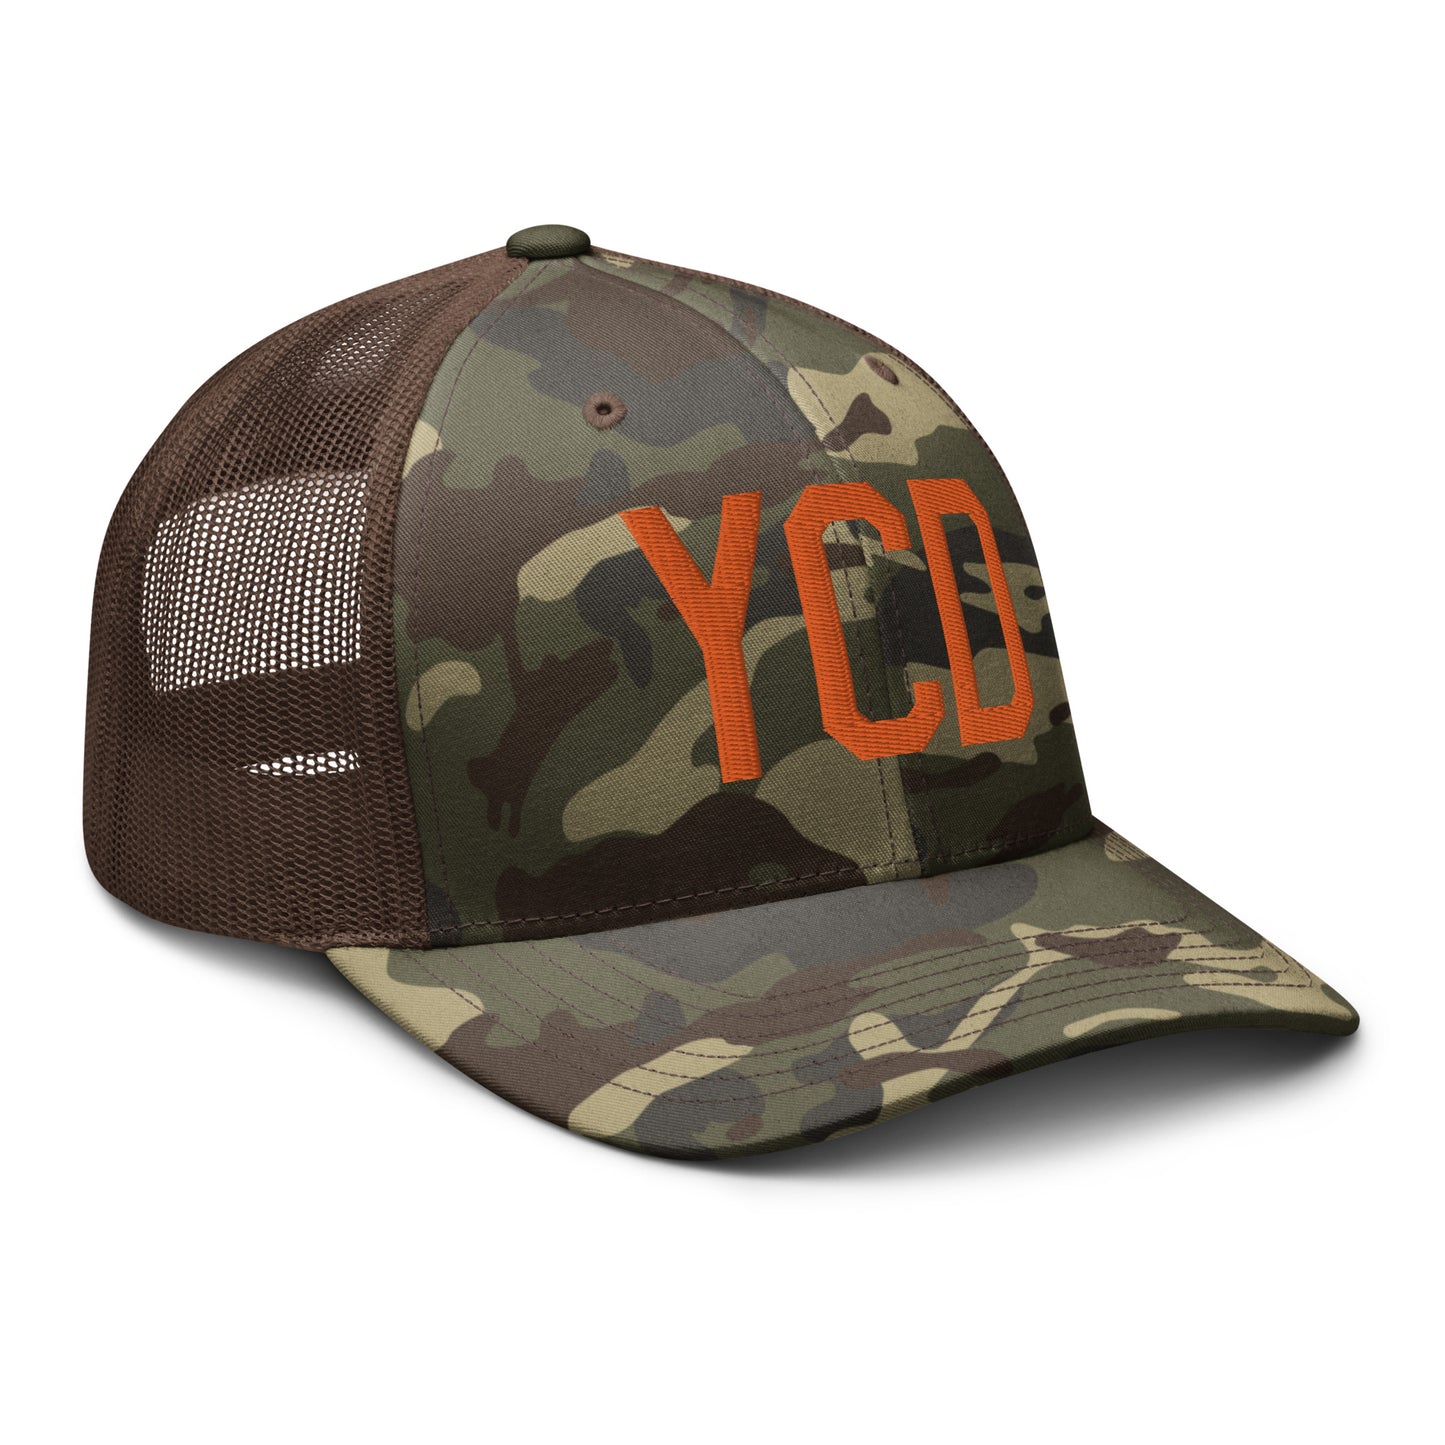 Airport Code Camouflage Trucker Hat - Orange • YCD Nanaimo • YHM Designs - Image 16